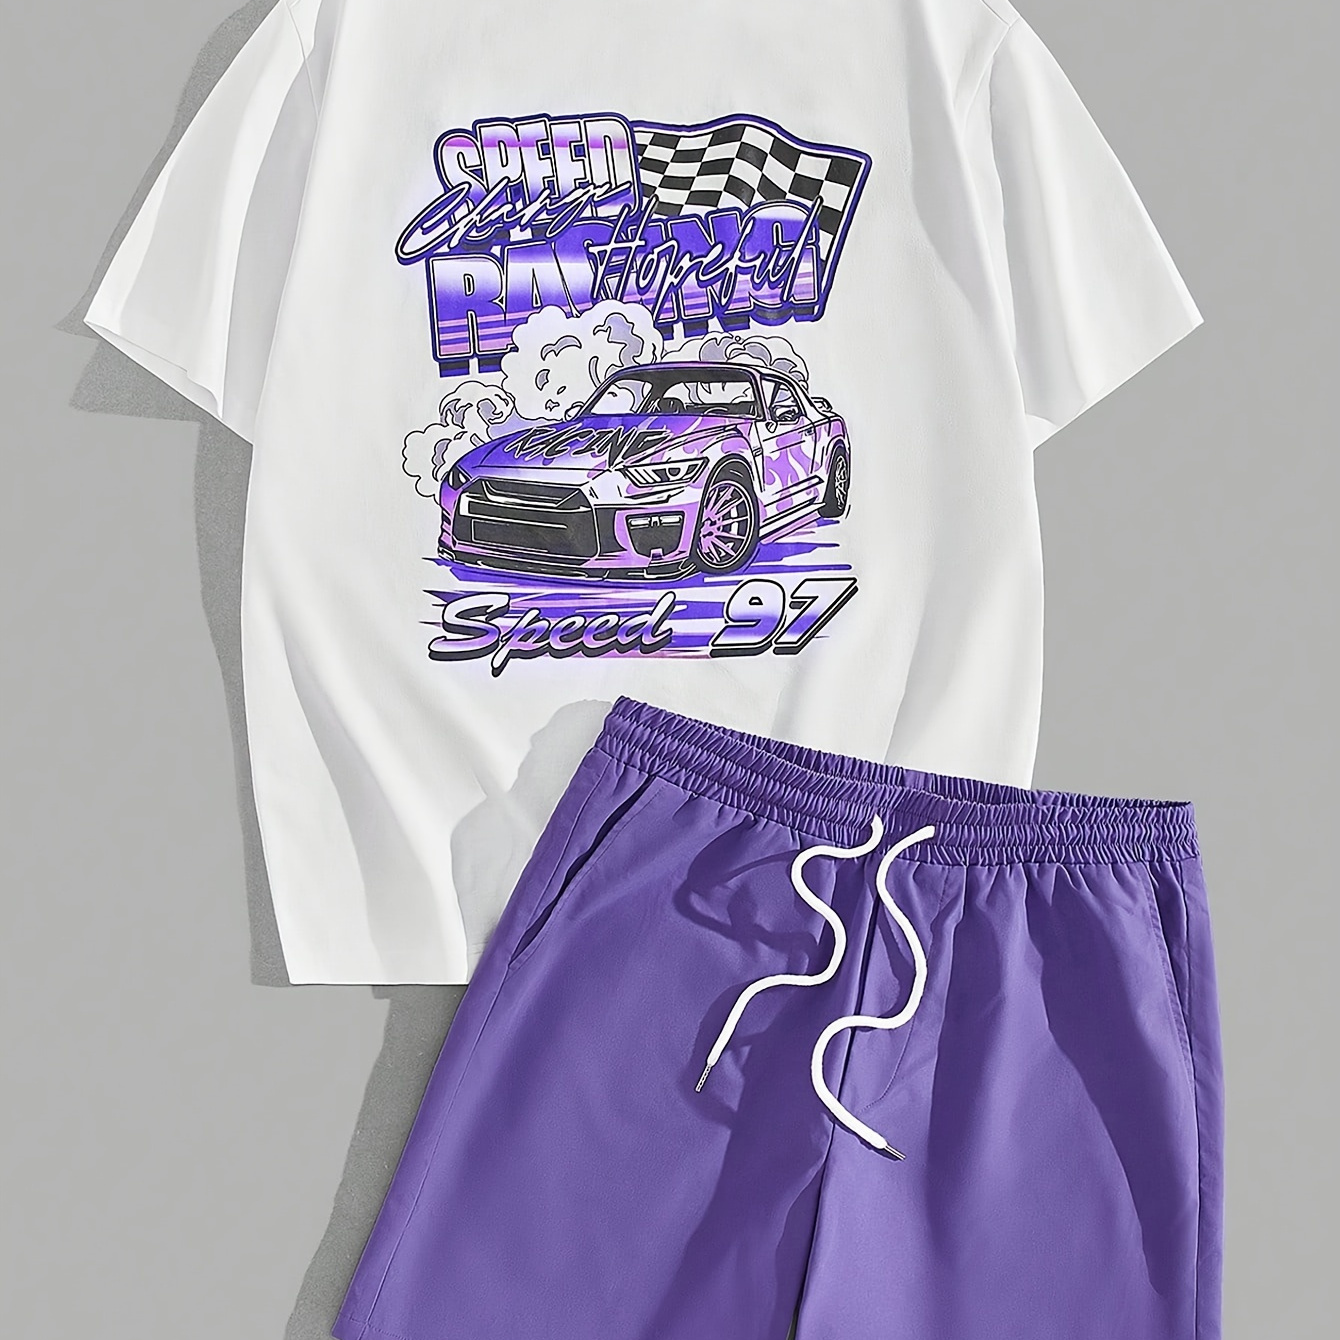 

2-piece Men's Casual Summer Outfit Set, Racing Car Graphic Print Short Sleeve Crew Neck T-shirt & Waist Drawstring Shorts With Pockets